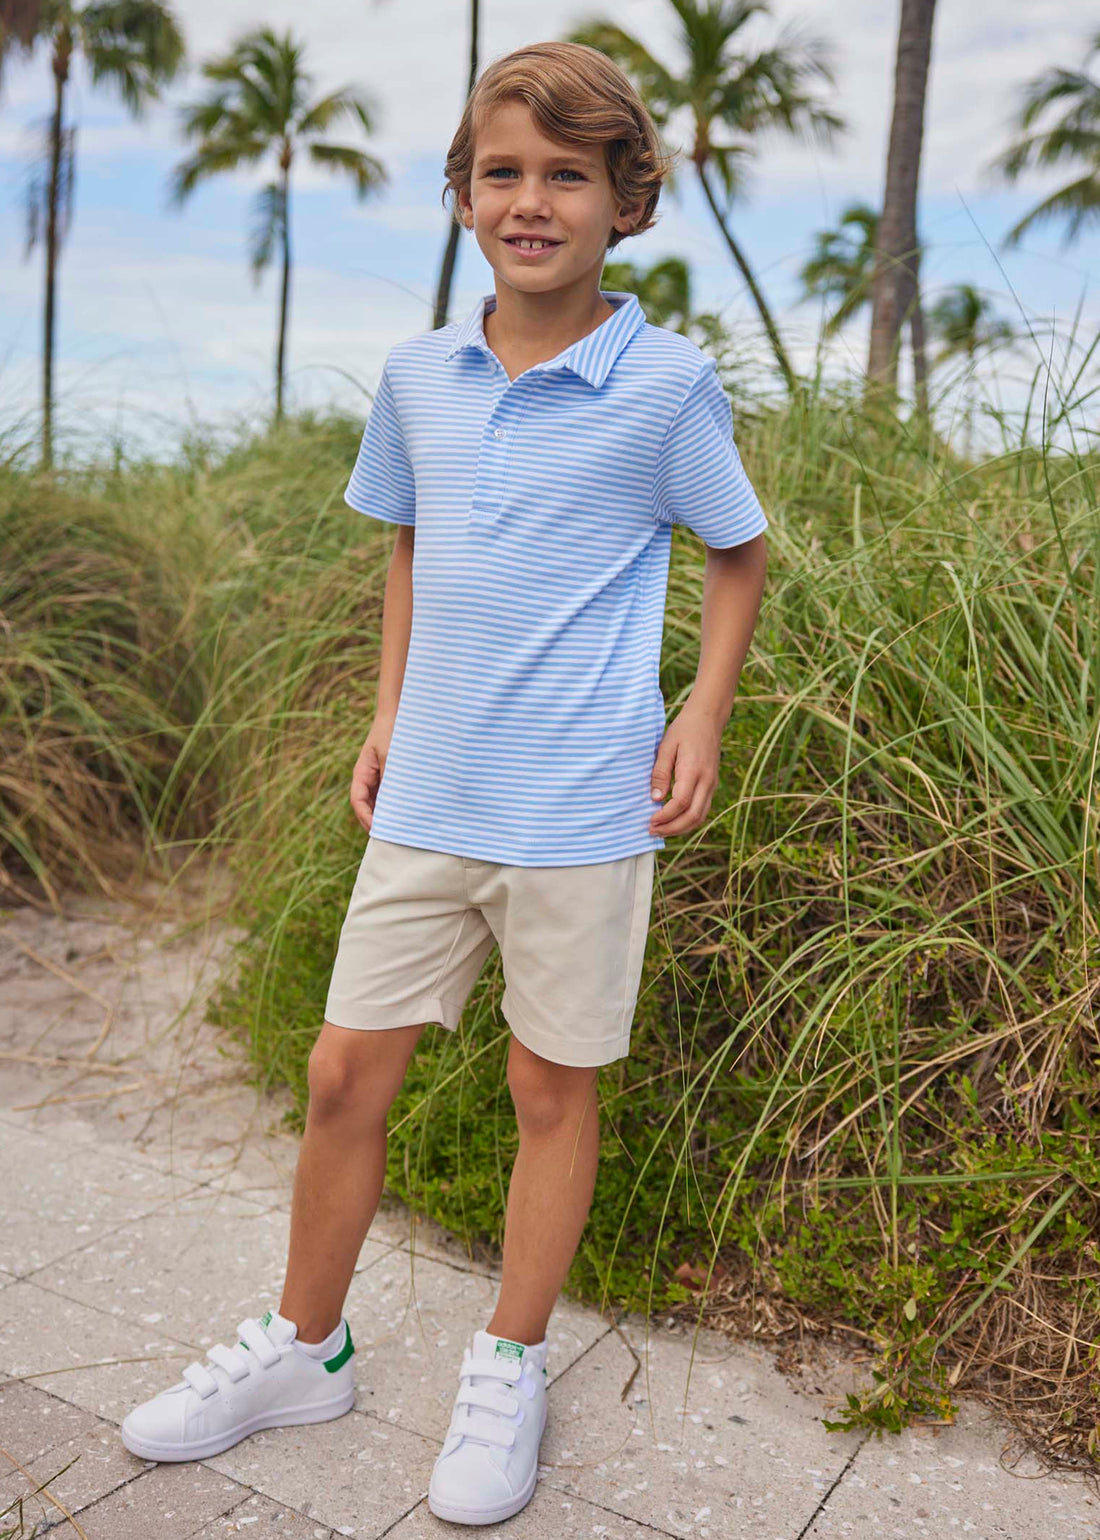 Little English | Boys Classic Twill Shorts - Classic Kids Clothes 12